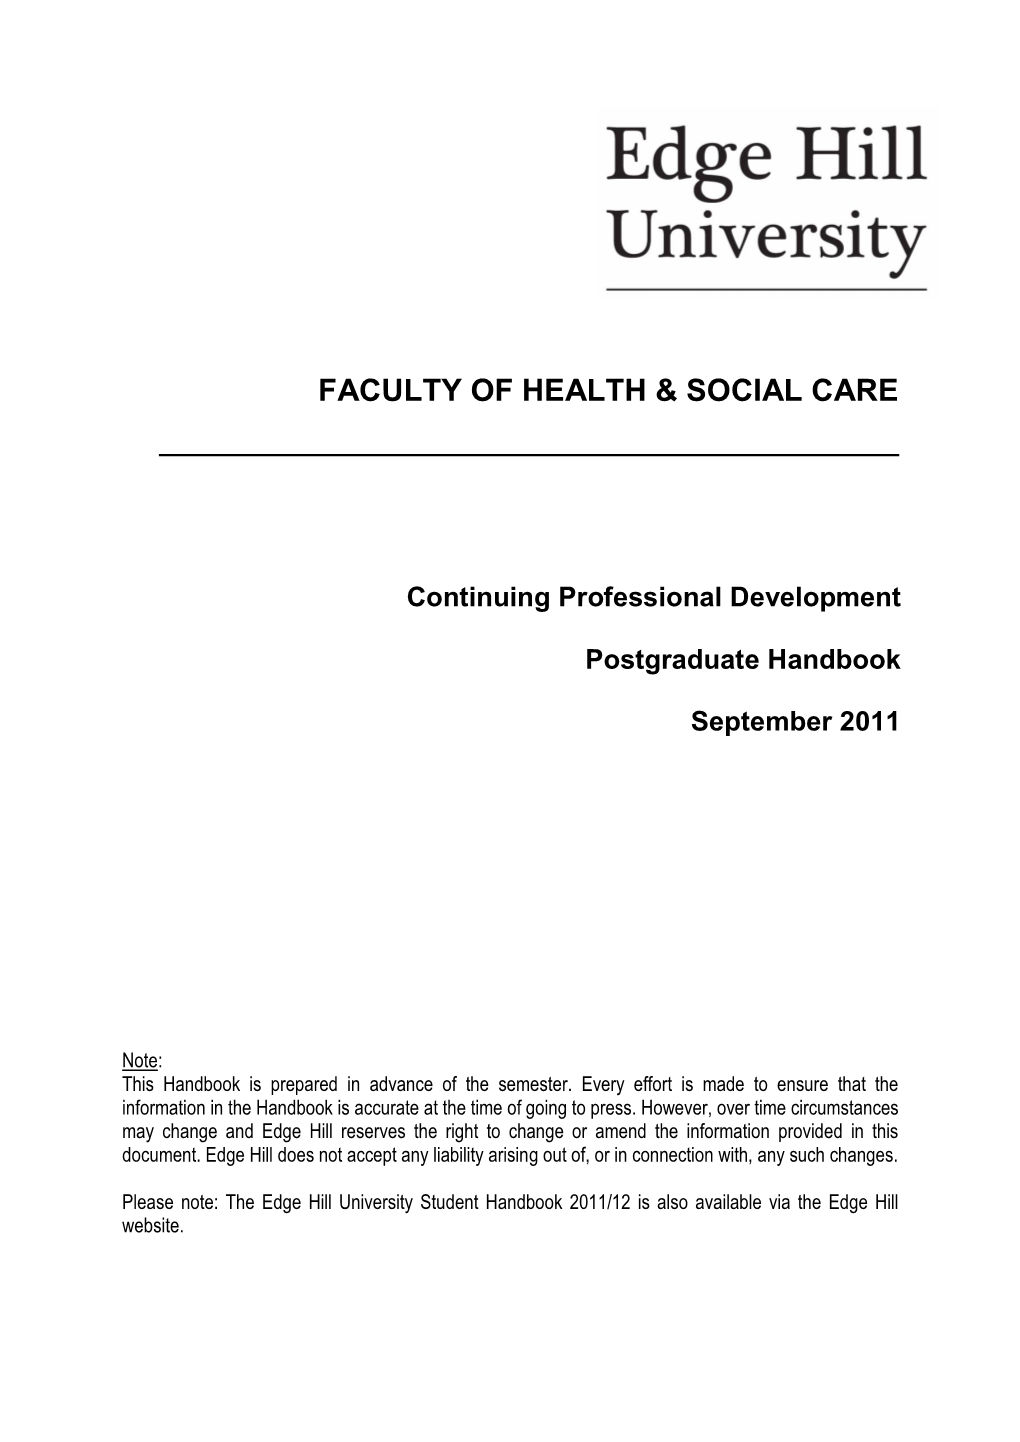 Introduction to Faculty of Health, Edge Hill University